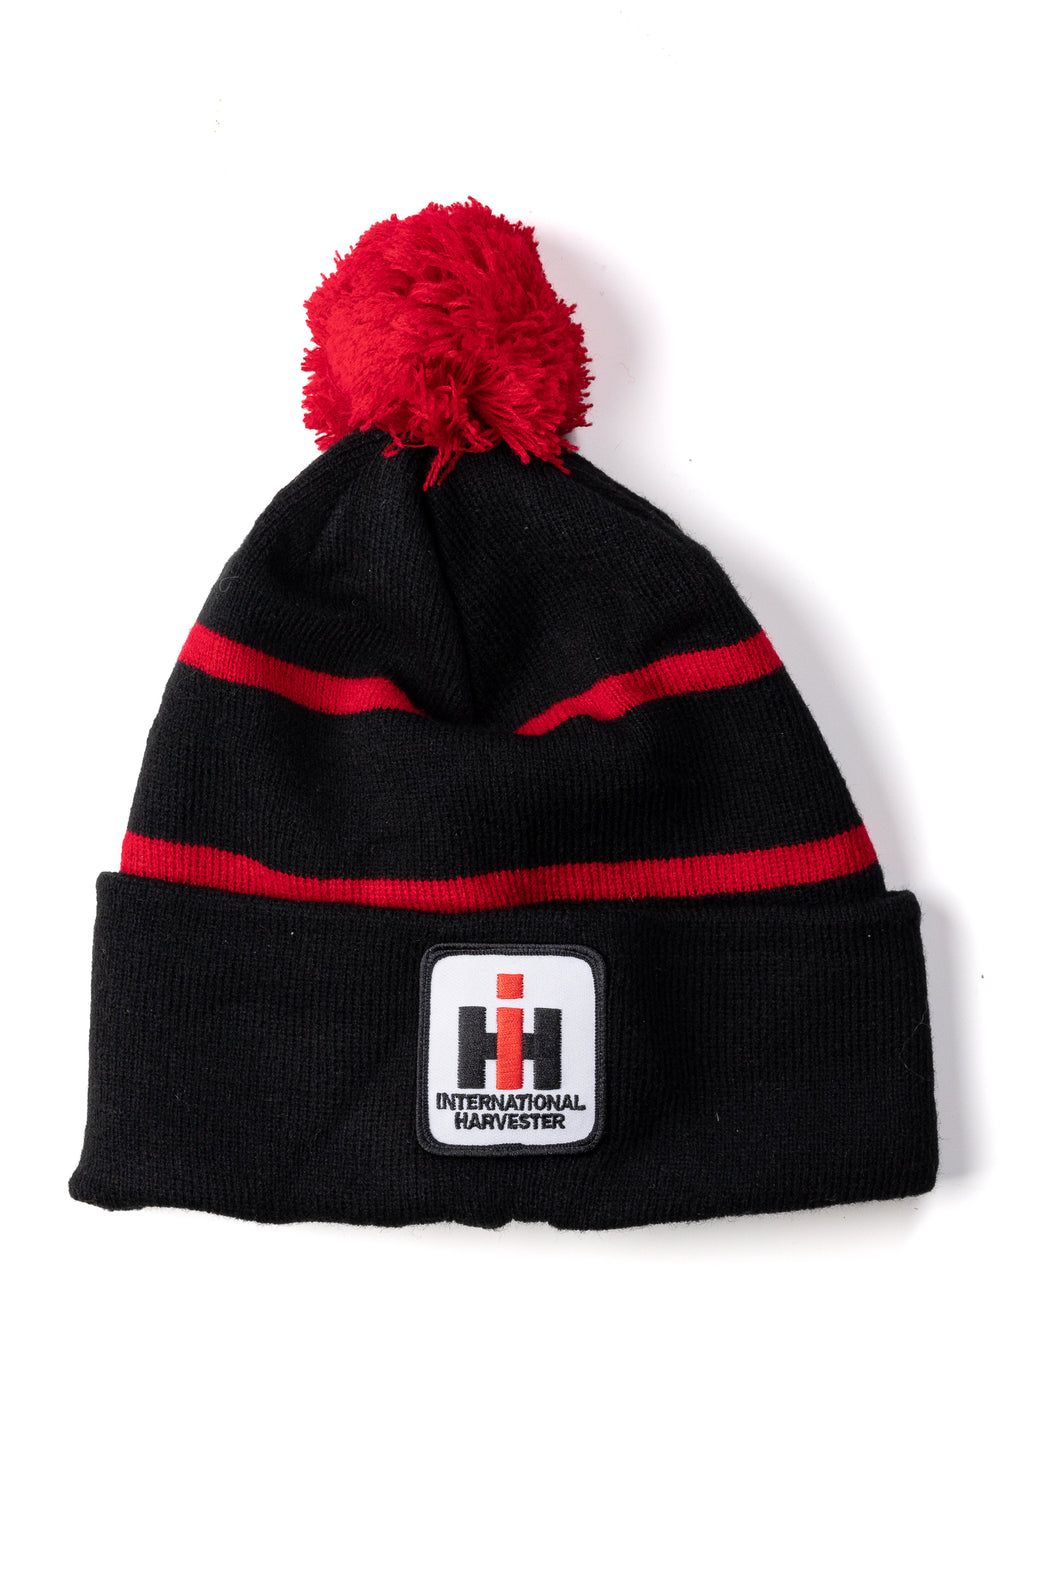 IH Knit Hat, Red and Black with Pom Pom top